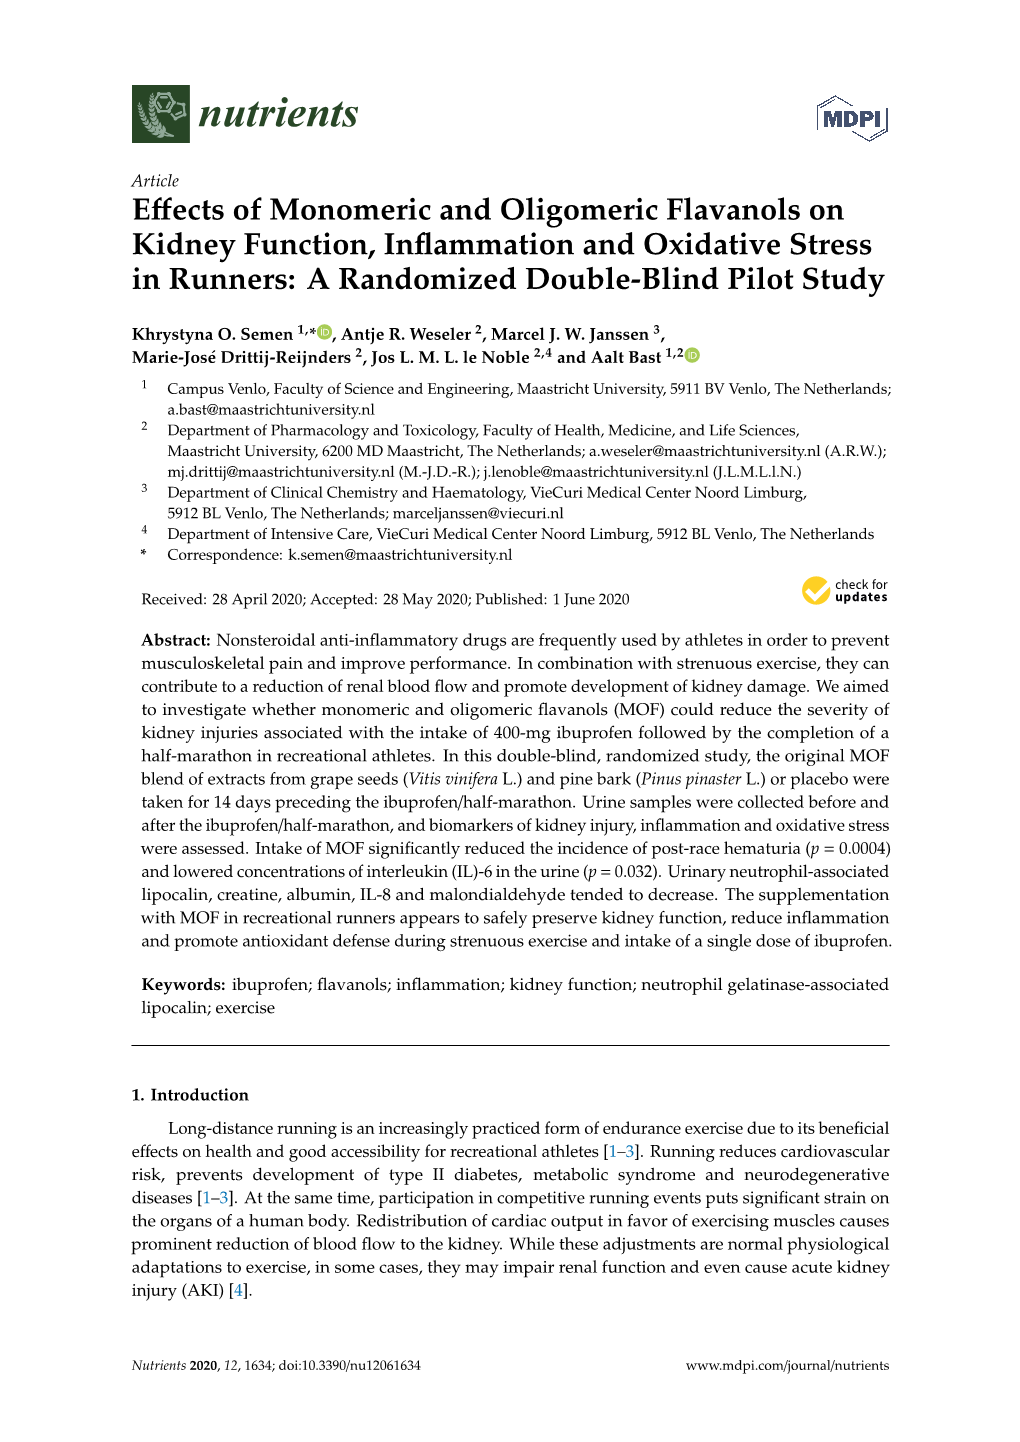 Effects of Monomeric and Oligomeric Flavanols on Kidney Function, Inflammation and Oxidative Stress in Runners